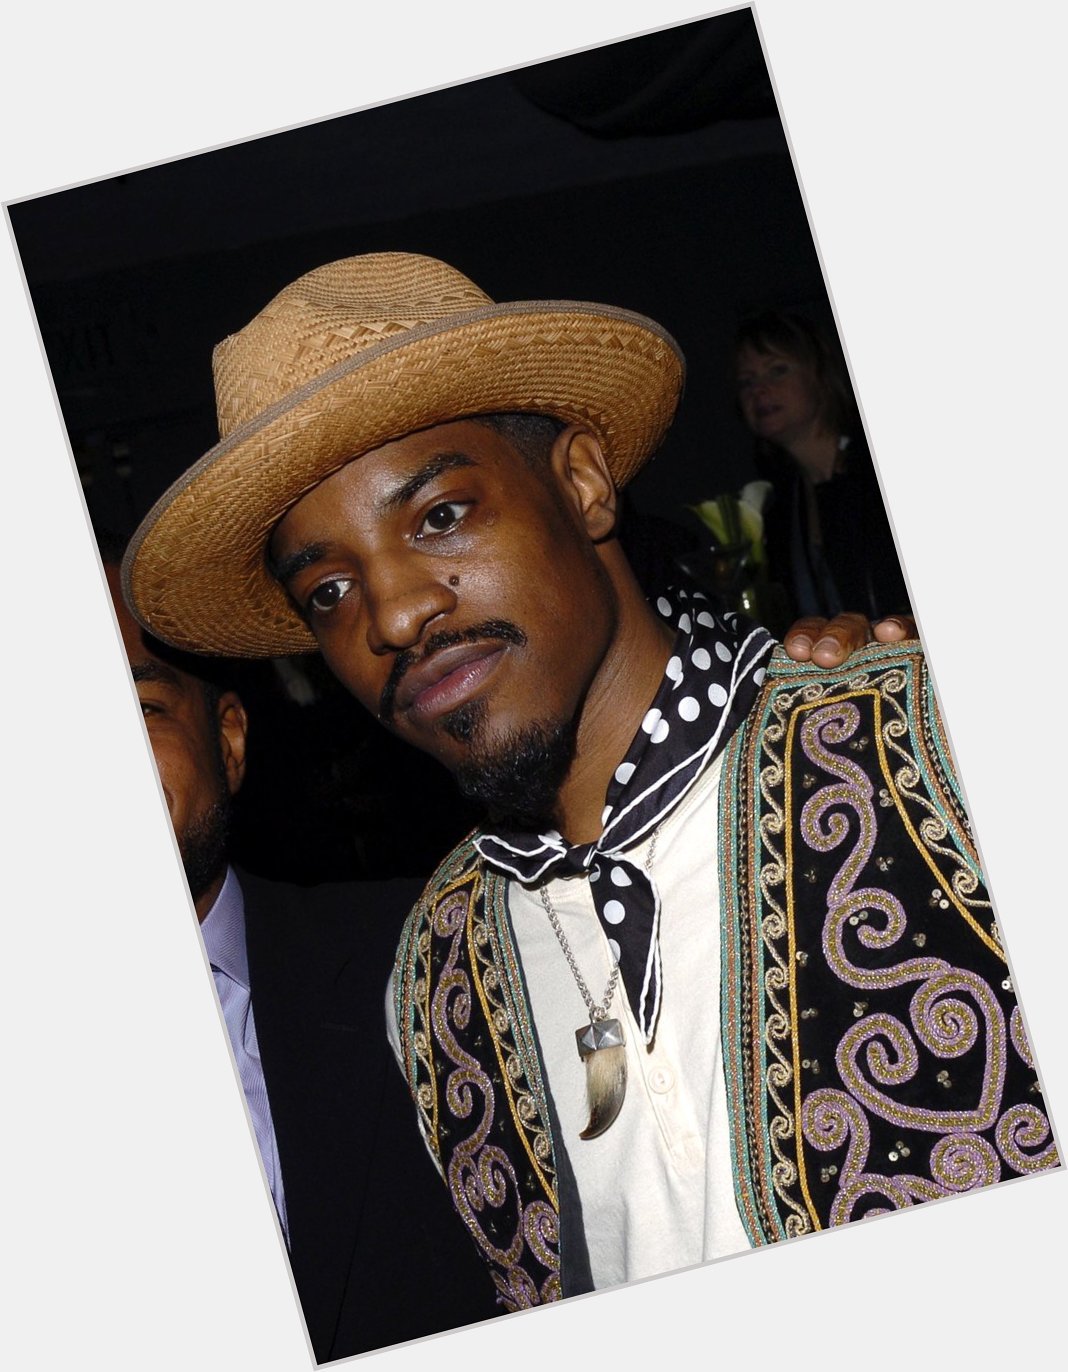 Happy 45th birthday to musical legend Andre 3000 